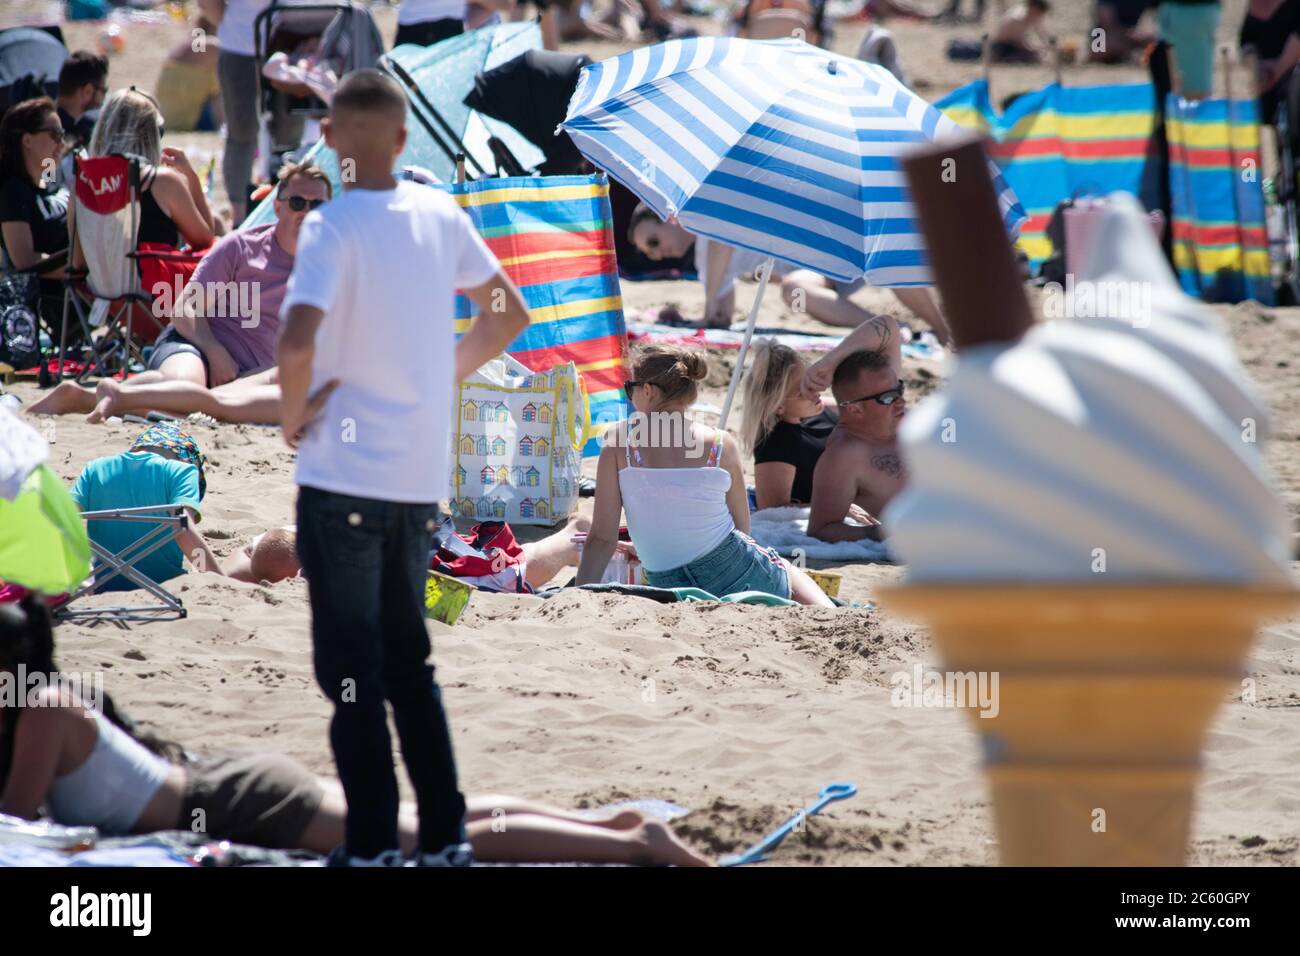 Weston-super-Mare, North Somerset, UK. 25th May 2020. Despite Weston General Hospital closing its A&E to new patients crowds throng the beach at the N Stock Photo